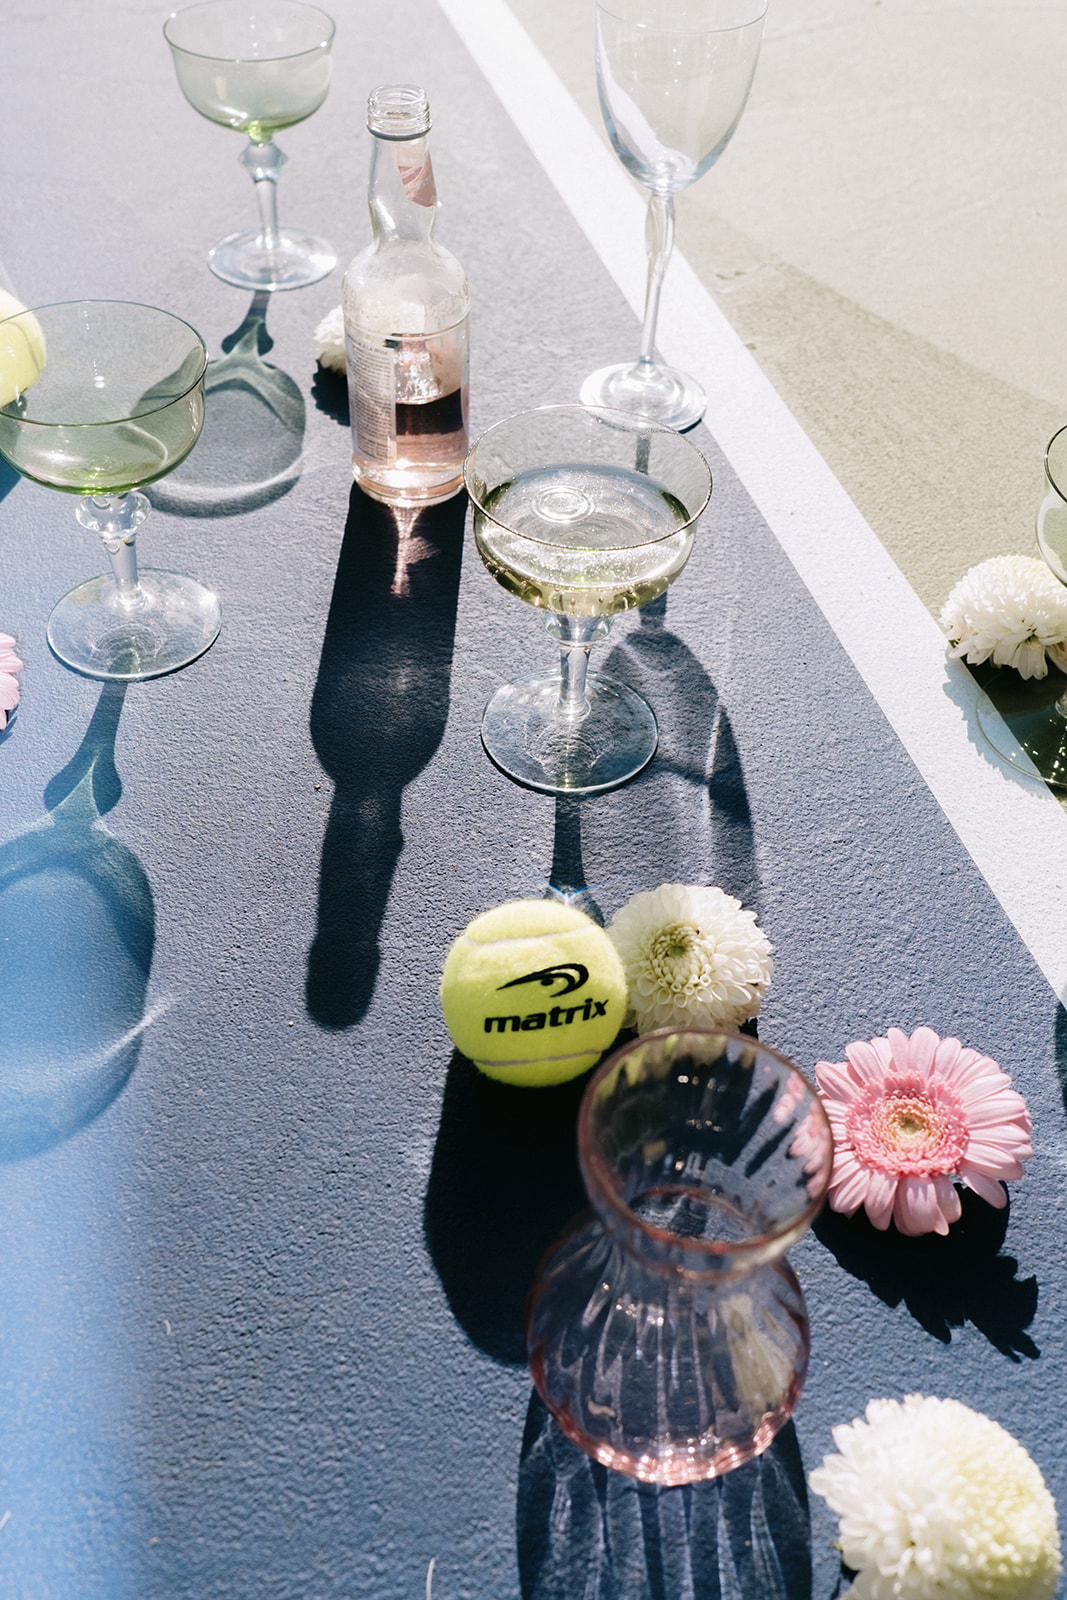 Unique tennis-themed wedding inspiration, chartreuse coup and pastel pink glassware featured in alternative flat lay photo, summery florals in pastel pink and white for wedding details photo